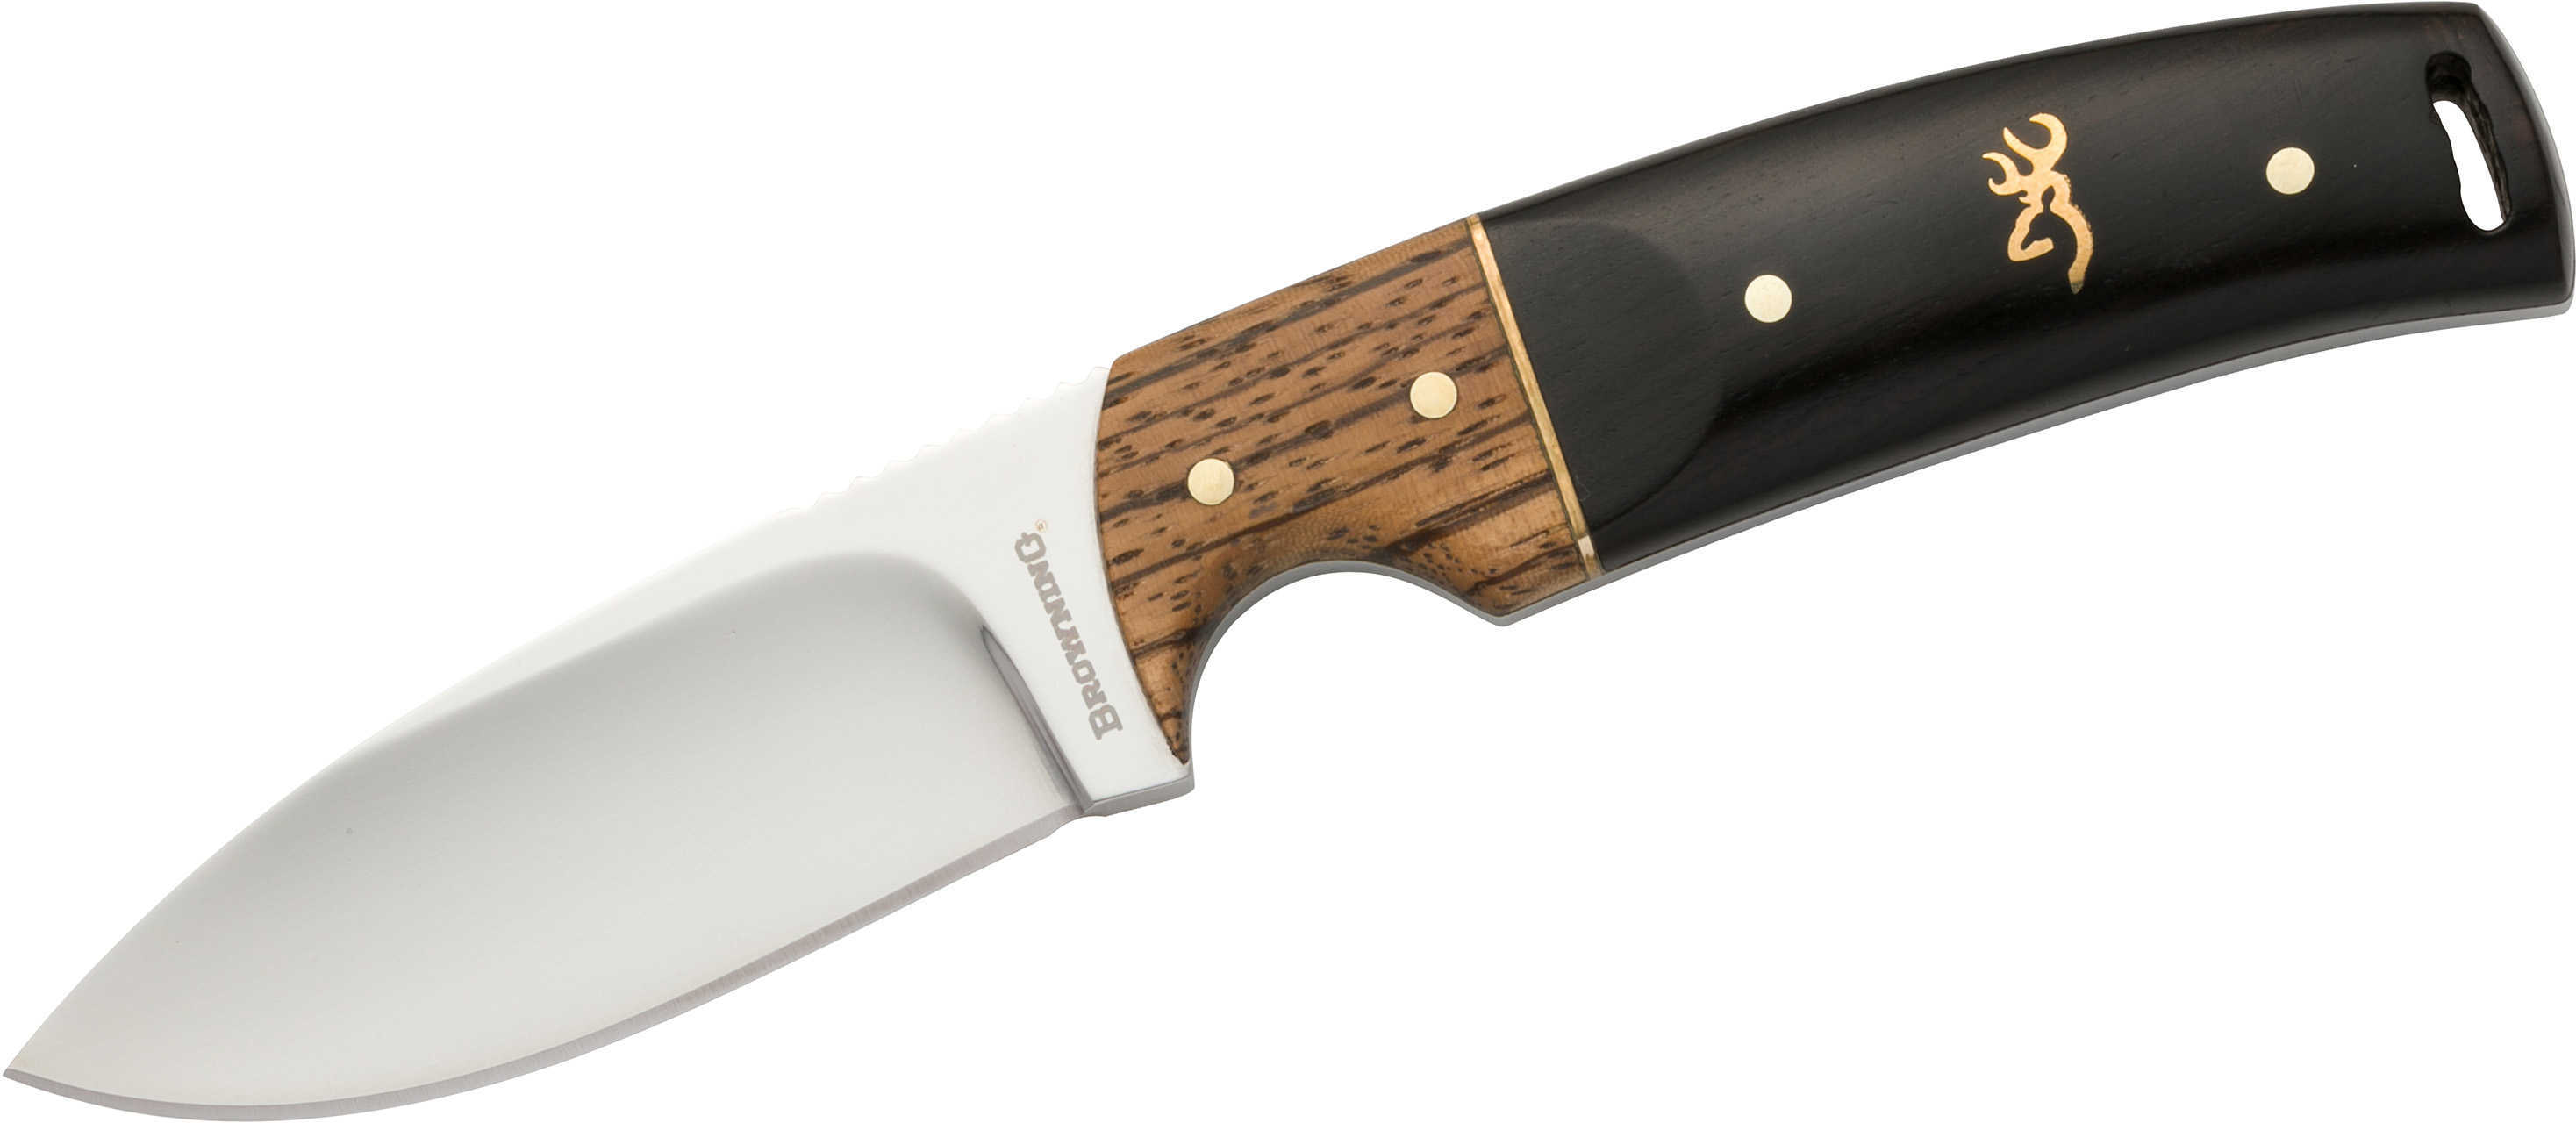 Browning 3220271 Buck Mark Hunter Fixed 3.125" 8Cr13MoV Stainless Steel Drop Point Hardwood